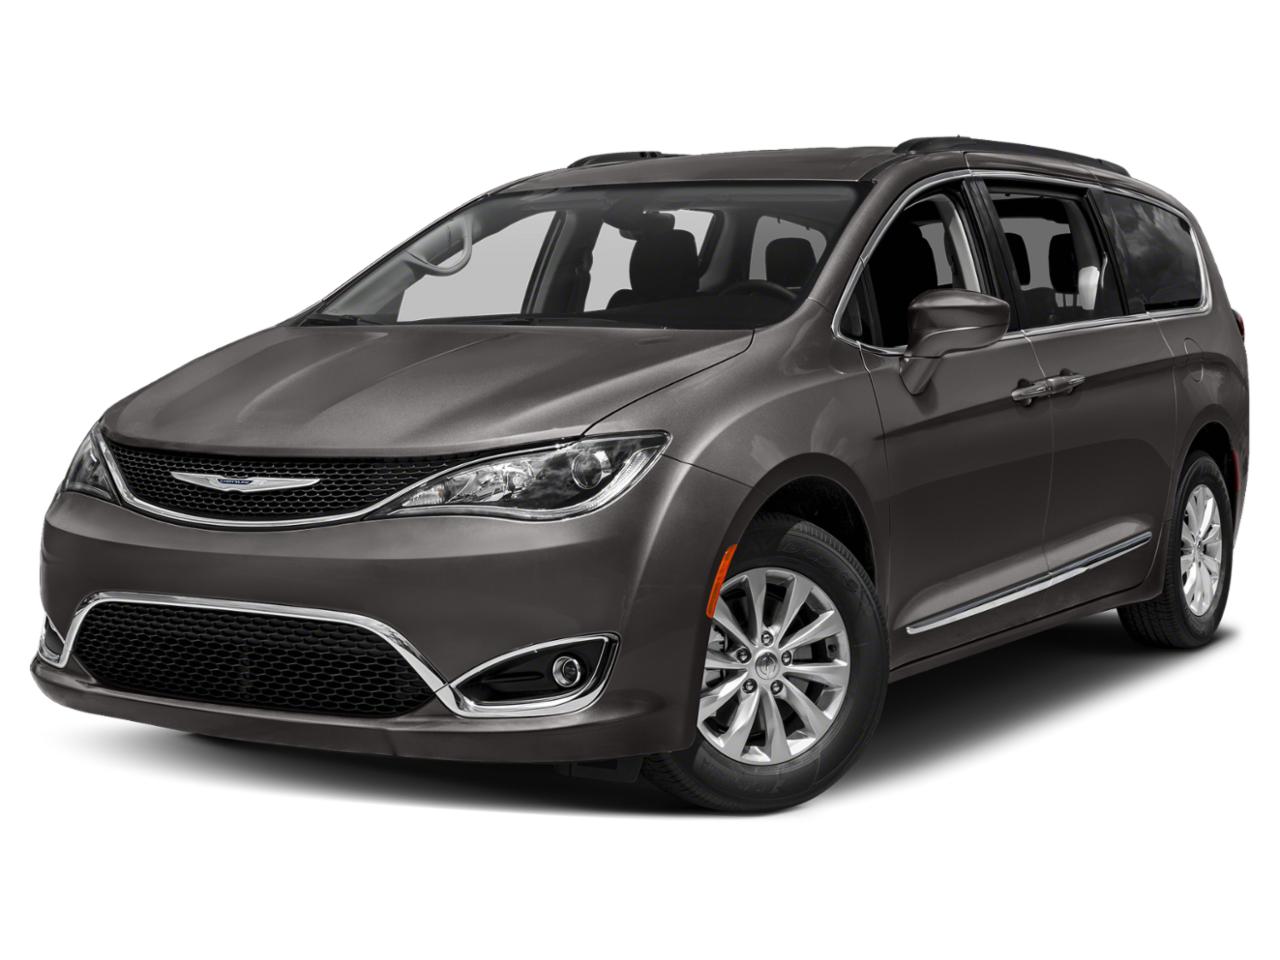 2019 Chrysler Pacifica Vehicle Photo in Plainfield, IL 60586